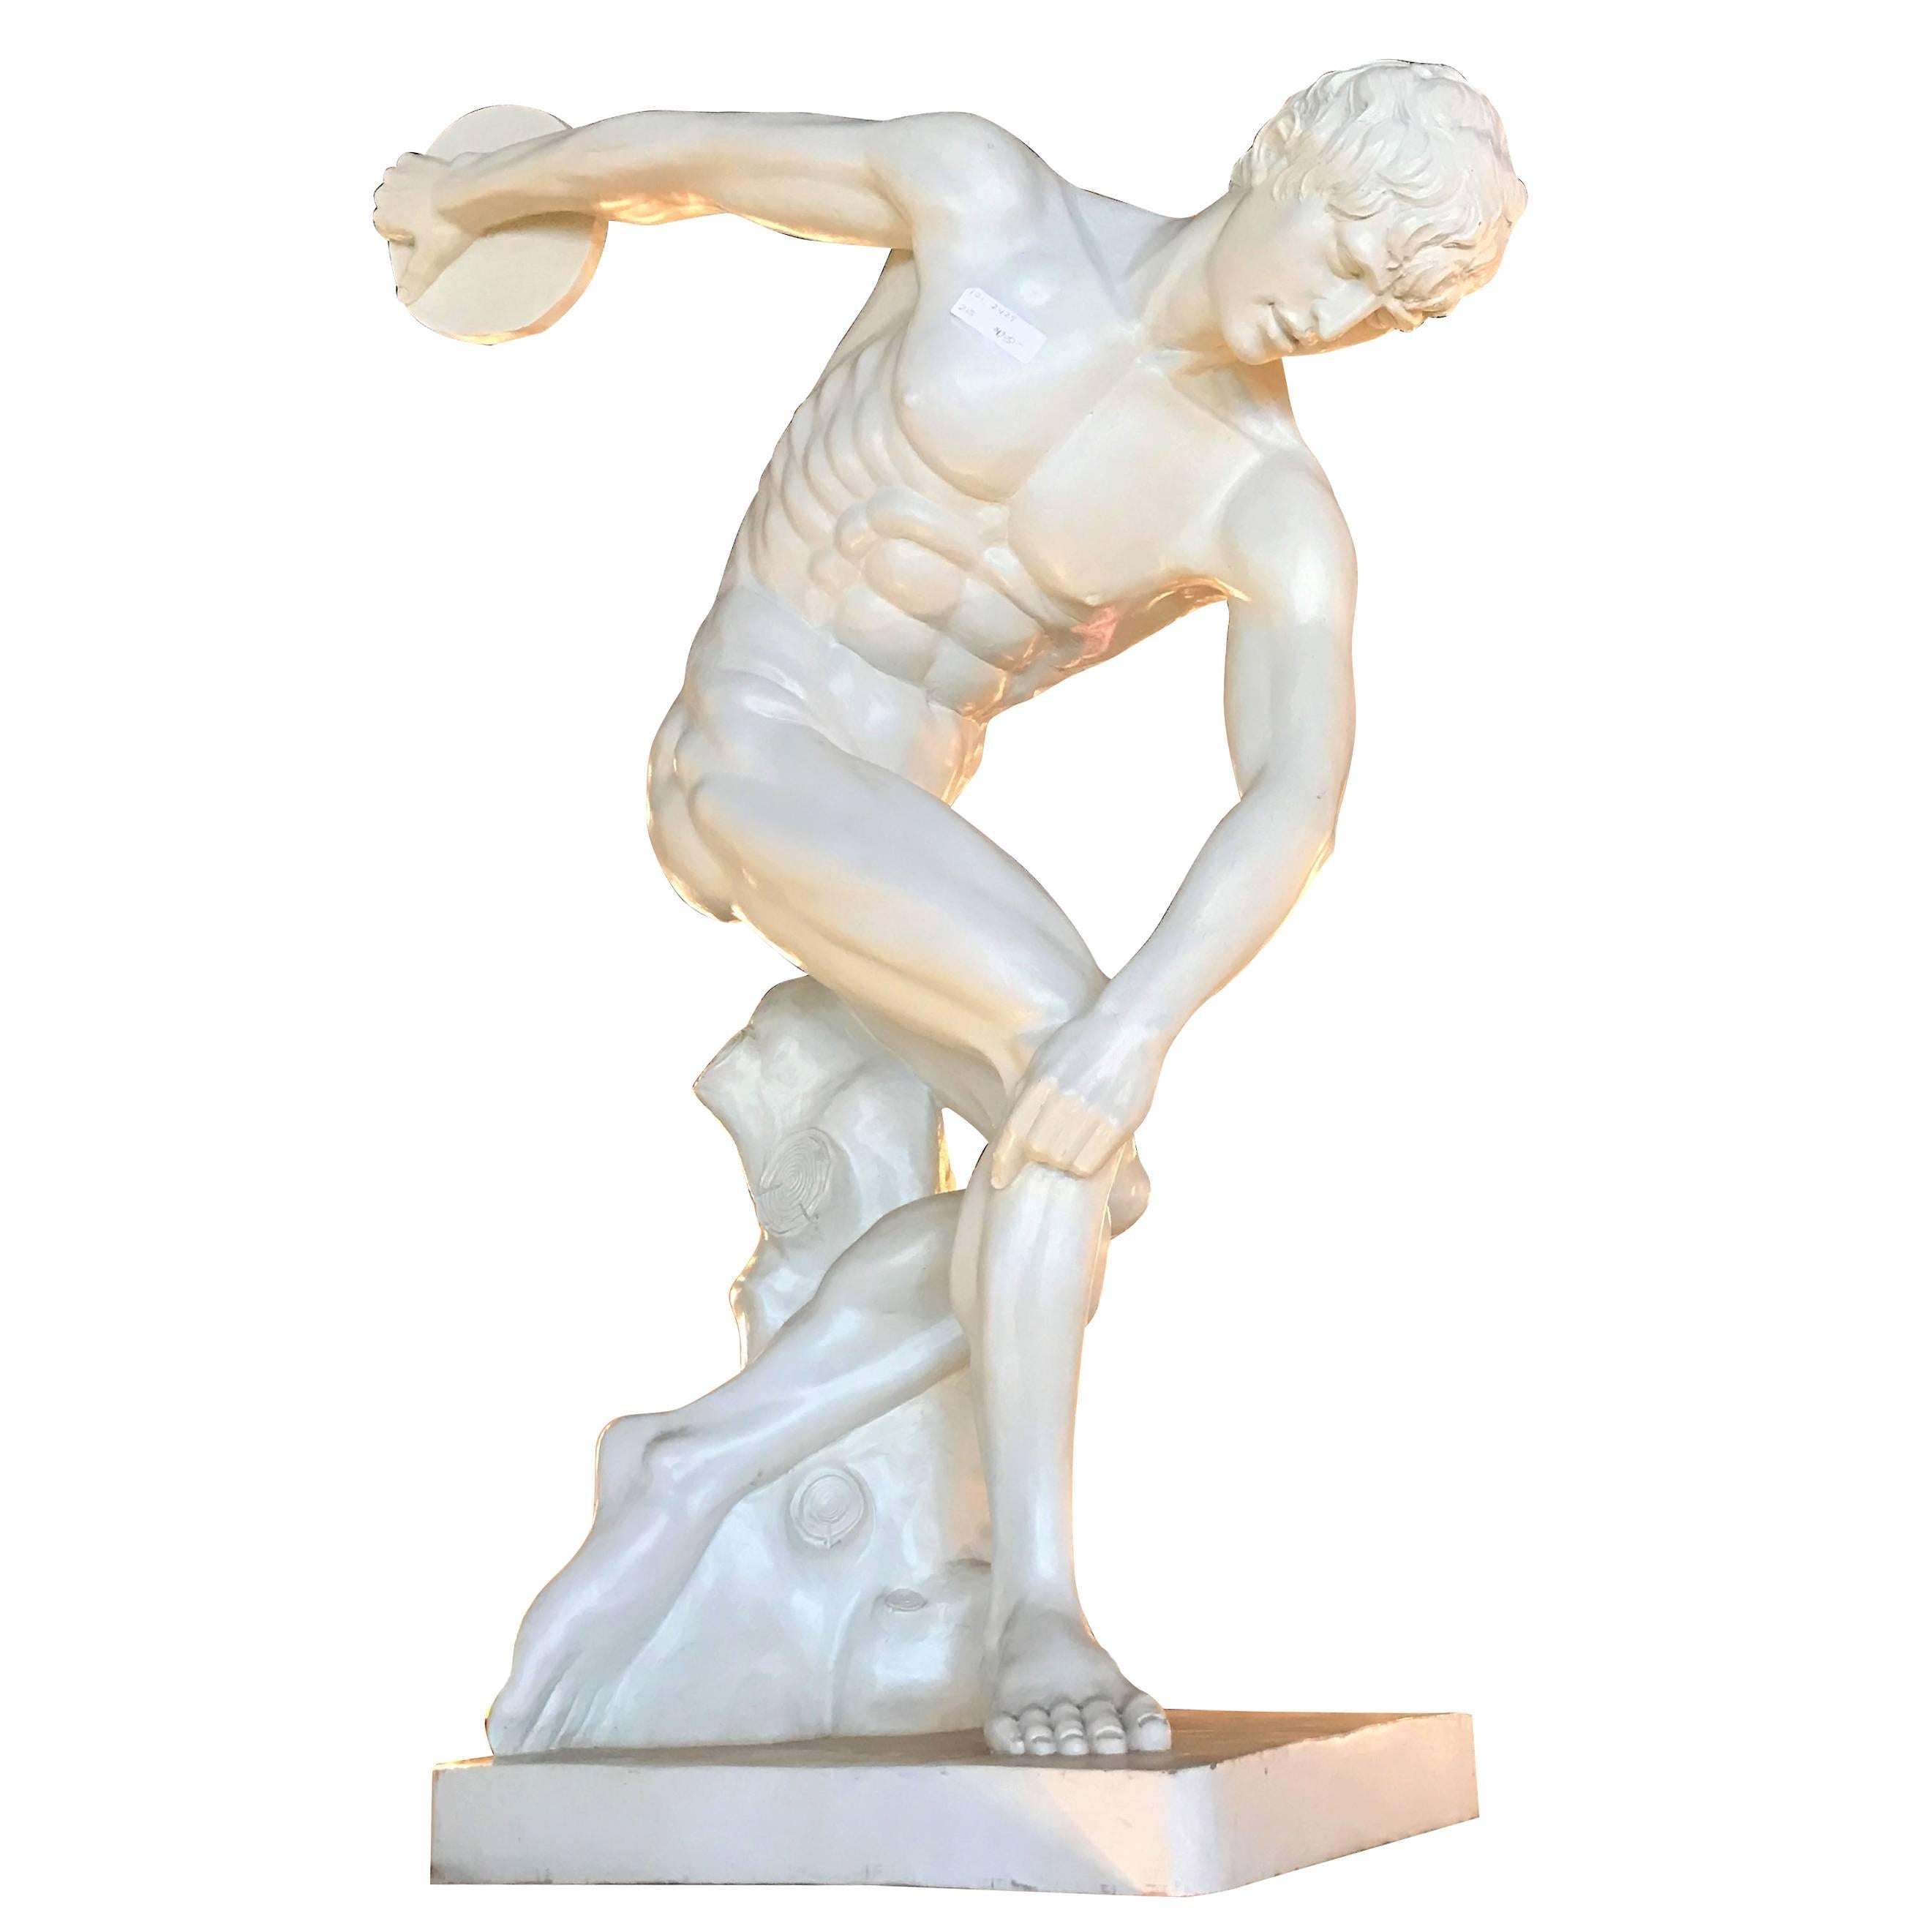 Neoclassical Style Fiberglass Life-sized Discus Thrower Sculpture